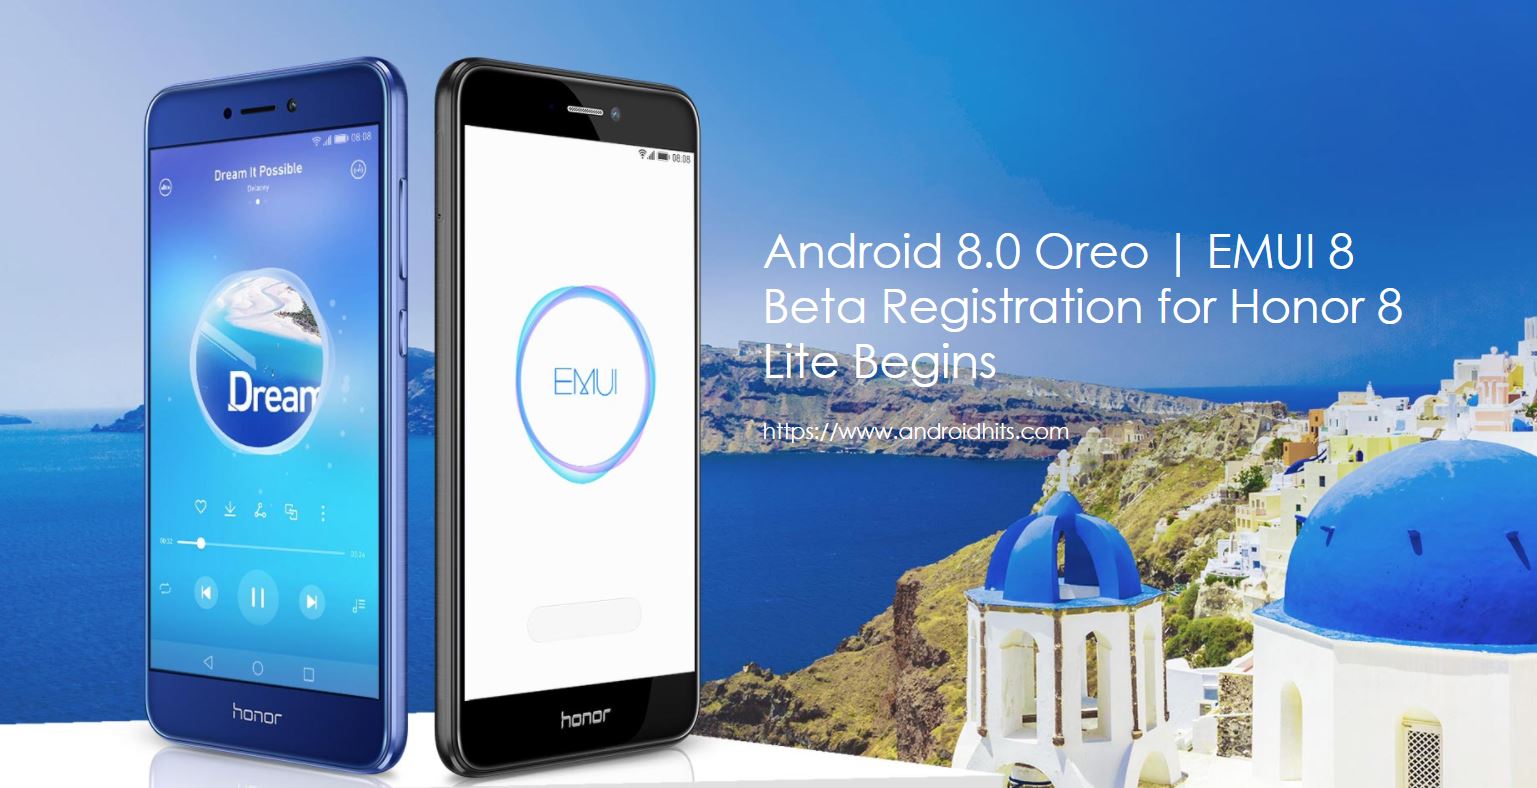 Android 8.0 Oreo with EMUI 8 Beta for Honor 8 Lite registration begins in China 8